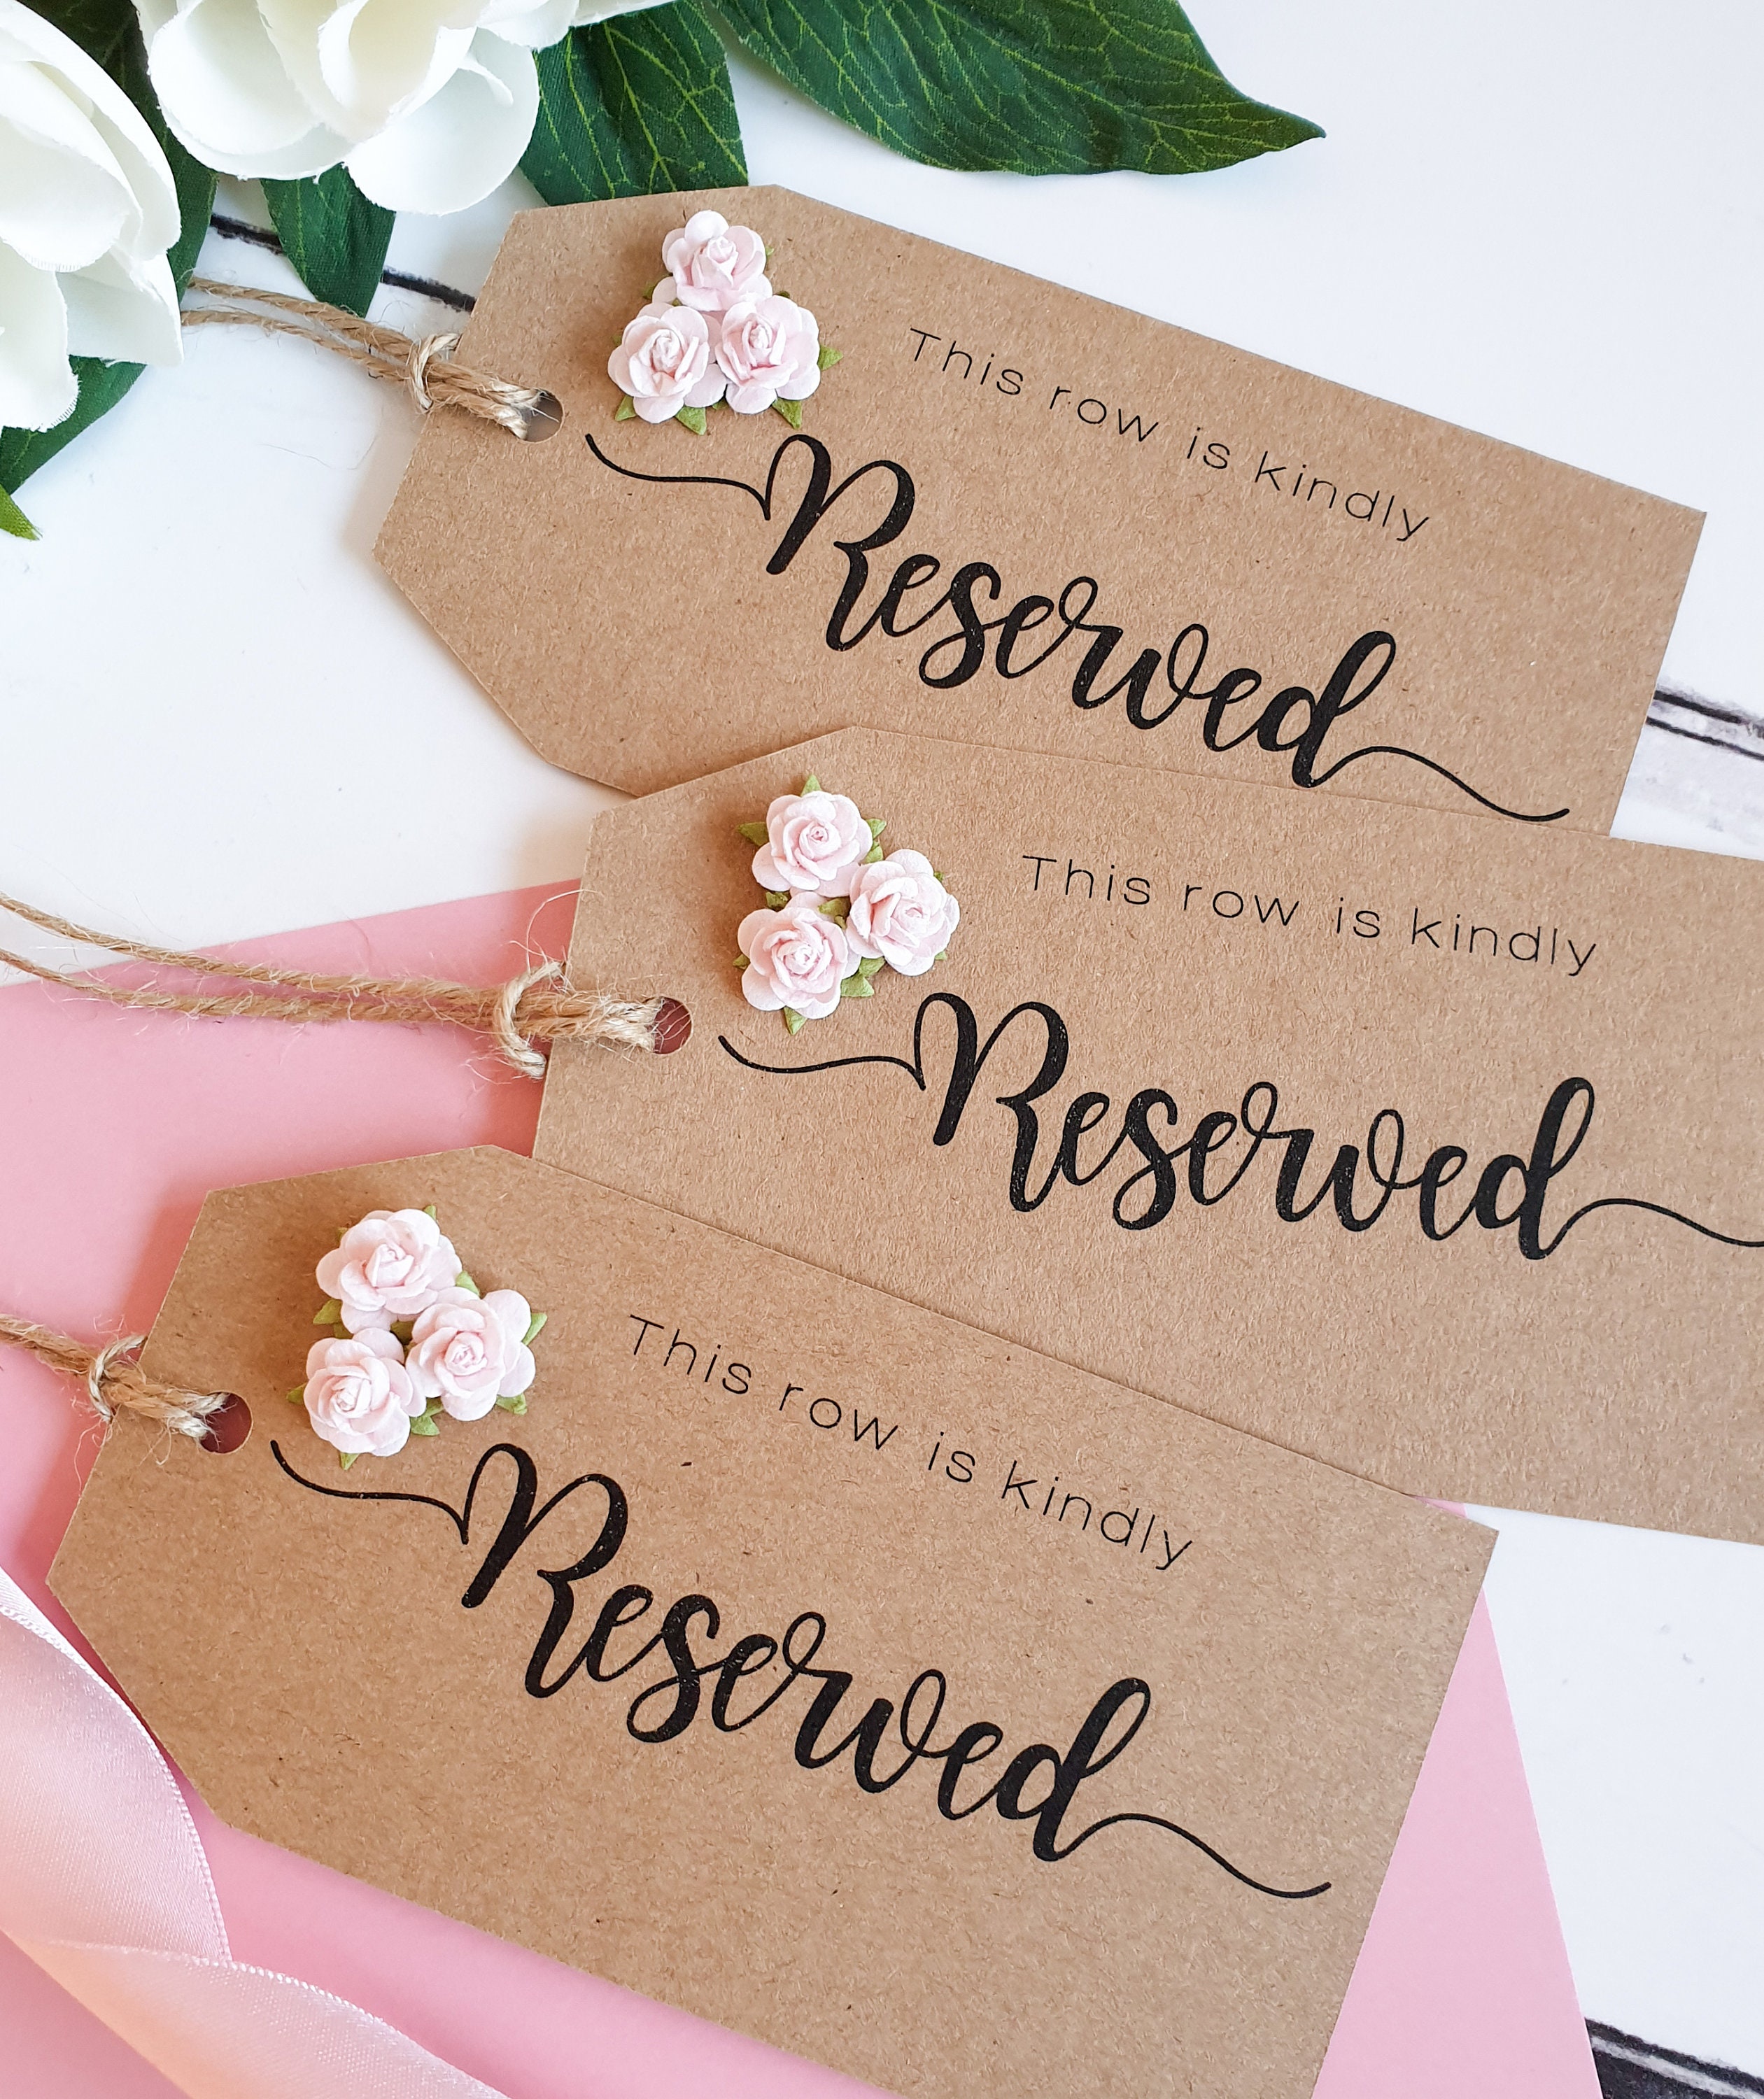 CUSTOM CALLIGRAPHY Cardstock Gift Tags/Reserved Seating Tags / Name Tags /  Personalized/Great for reserving wedding rows or custom gift tags